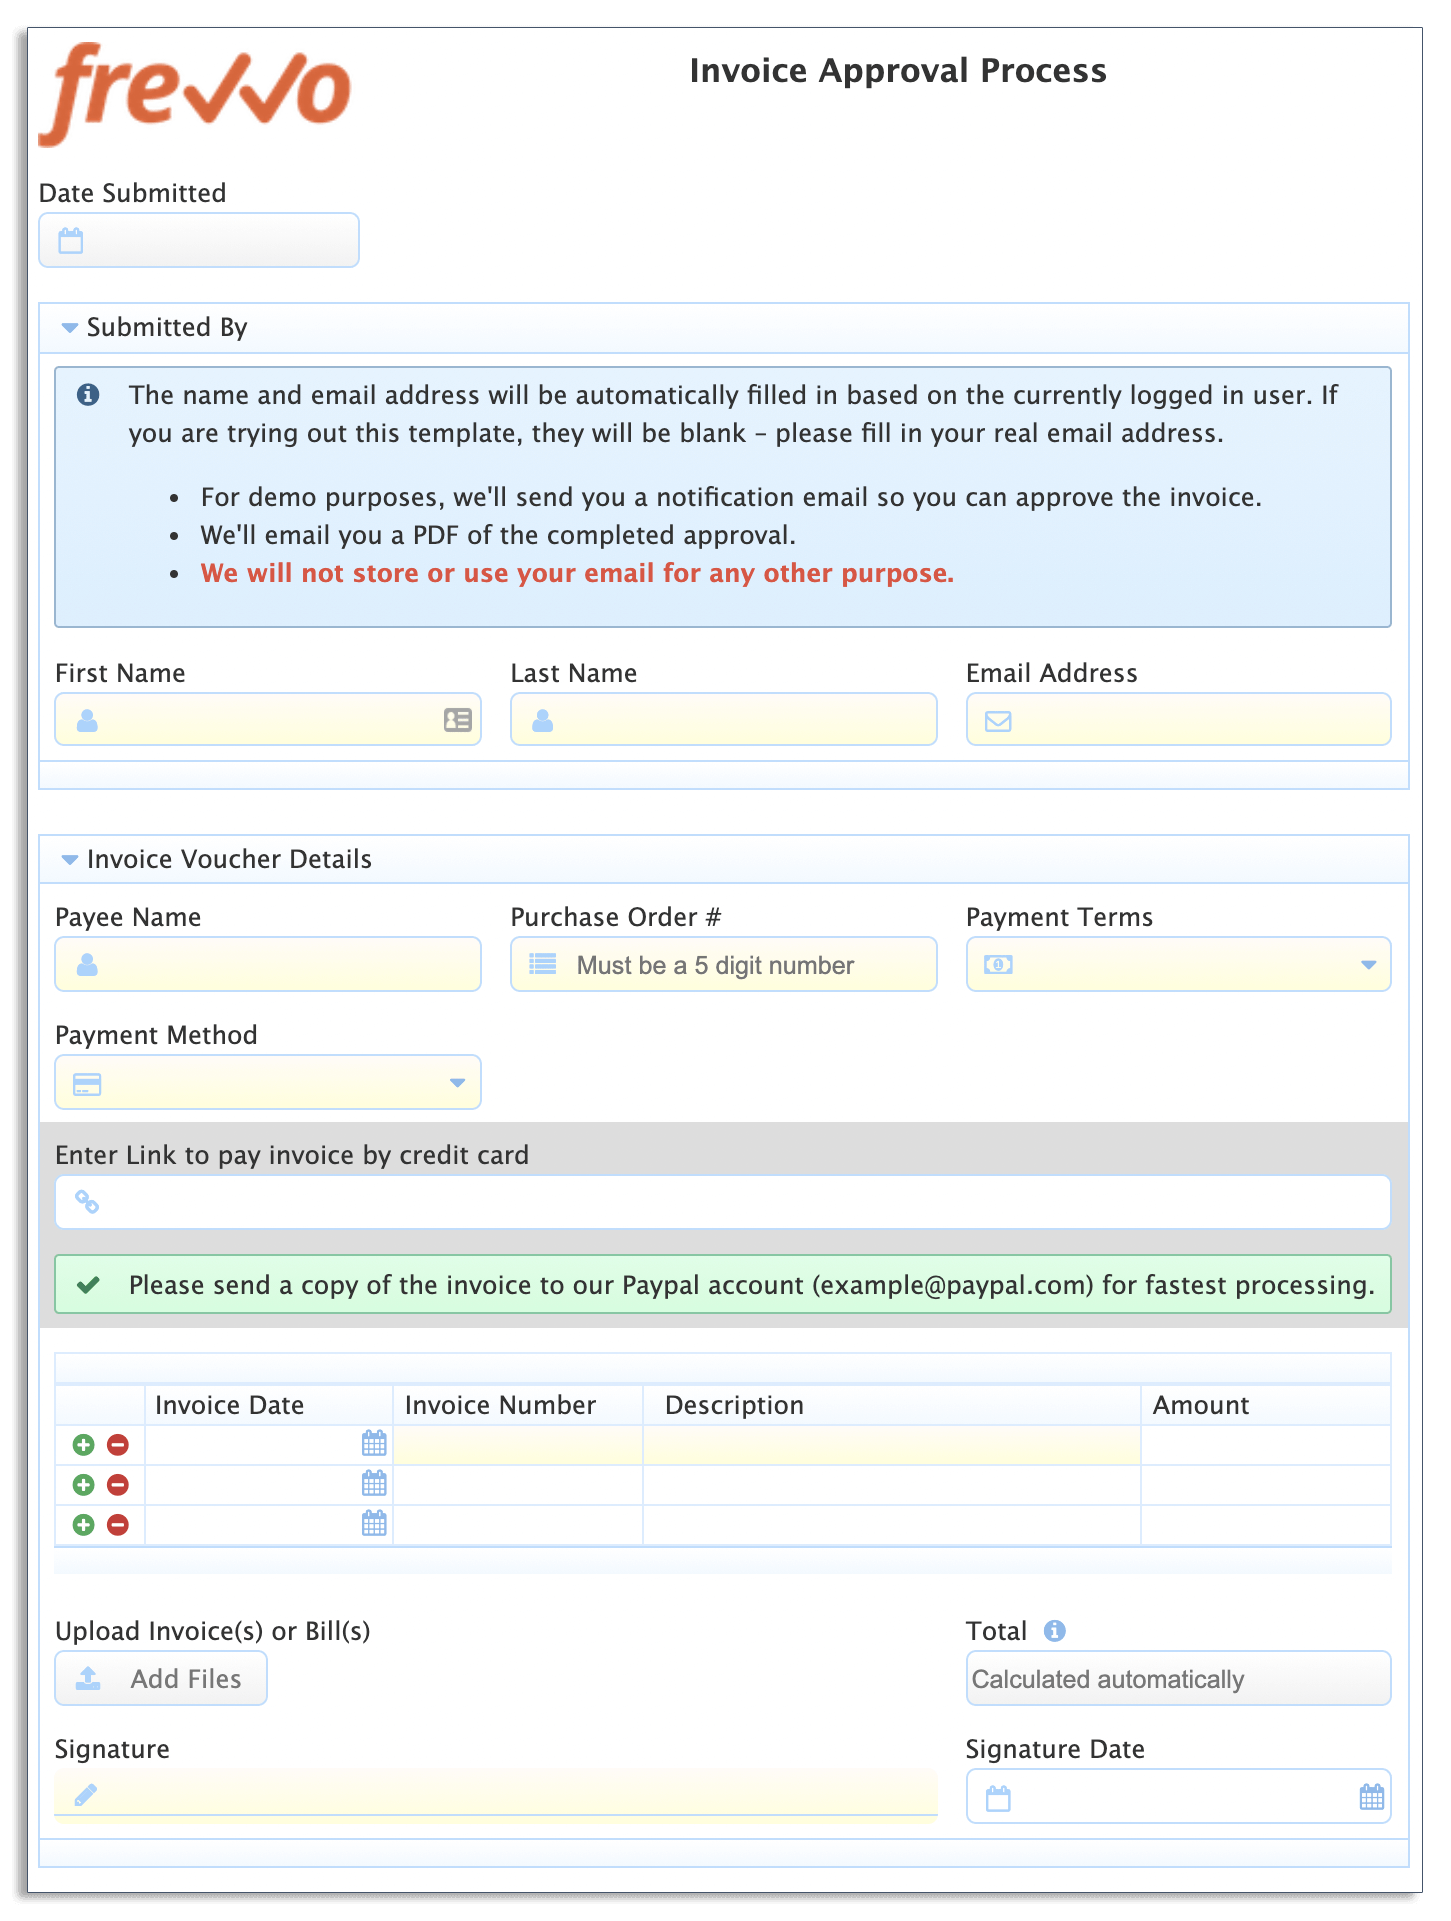 Invoice approval form in frevvo